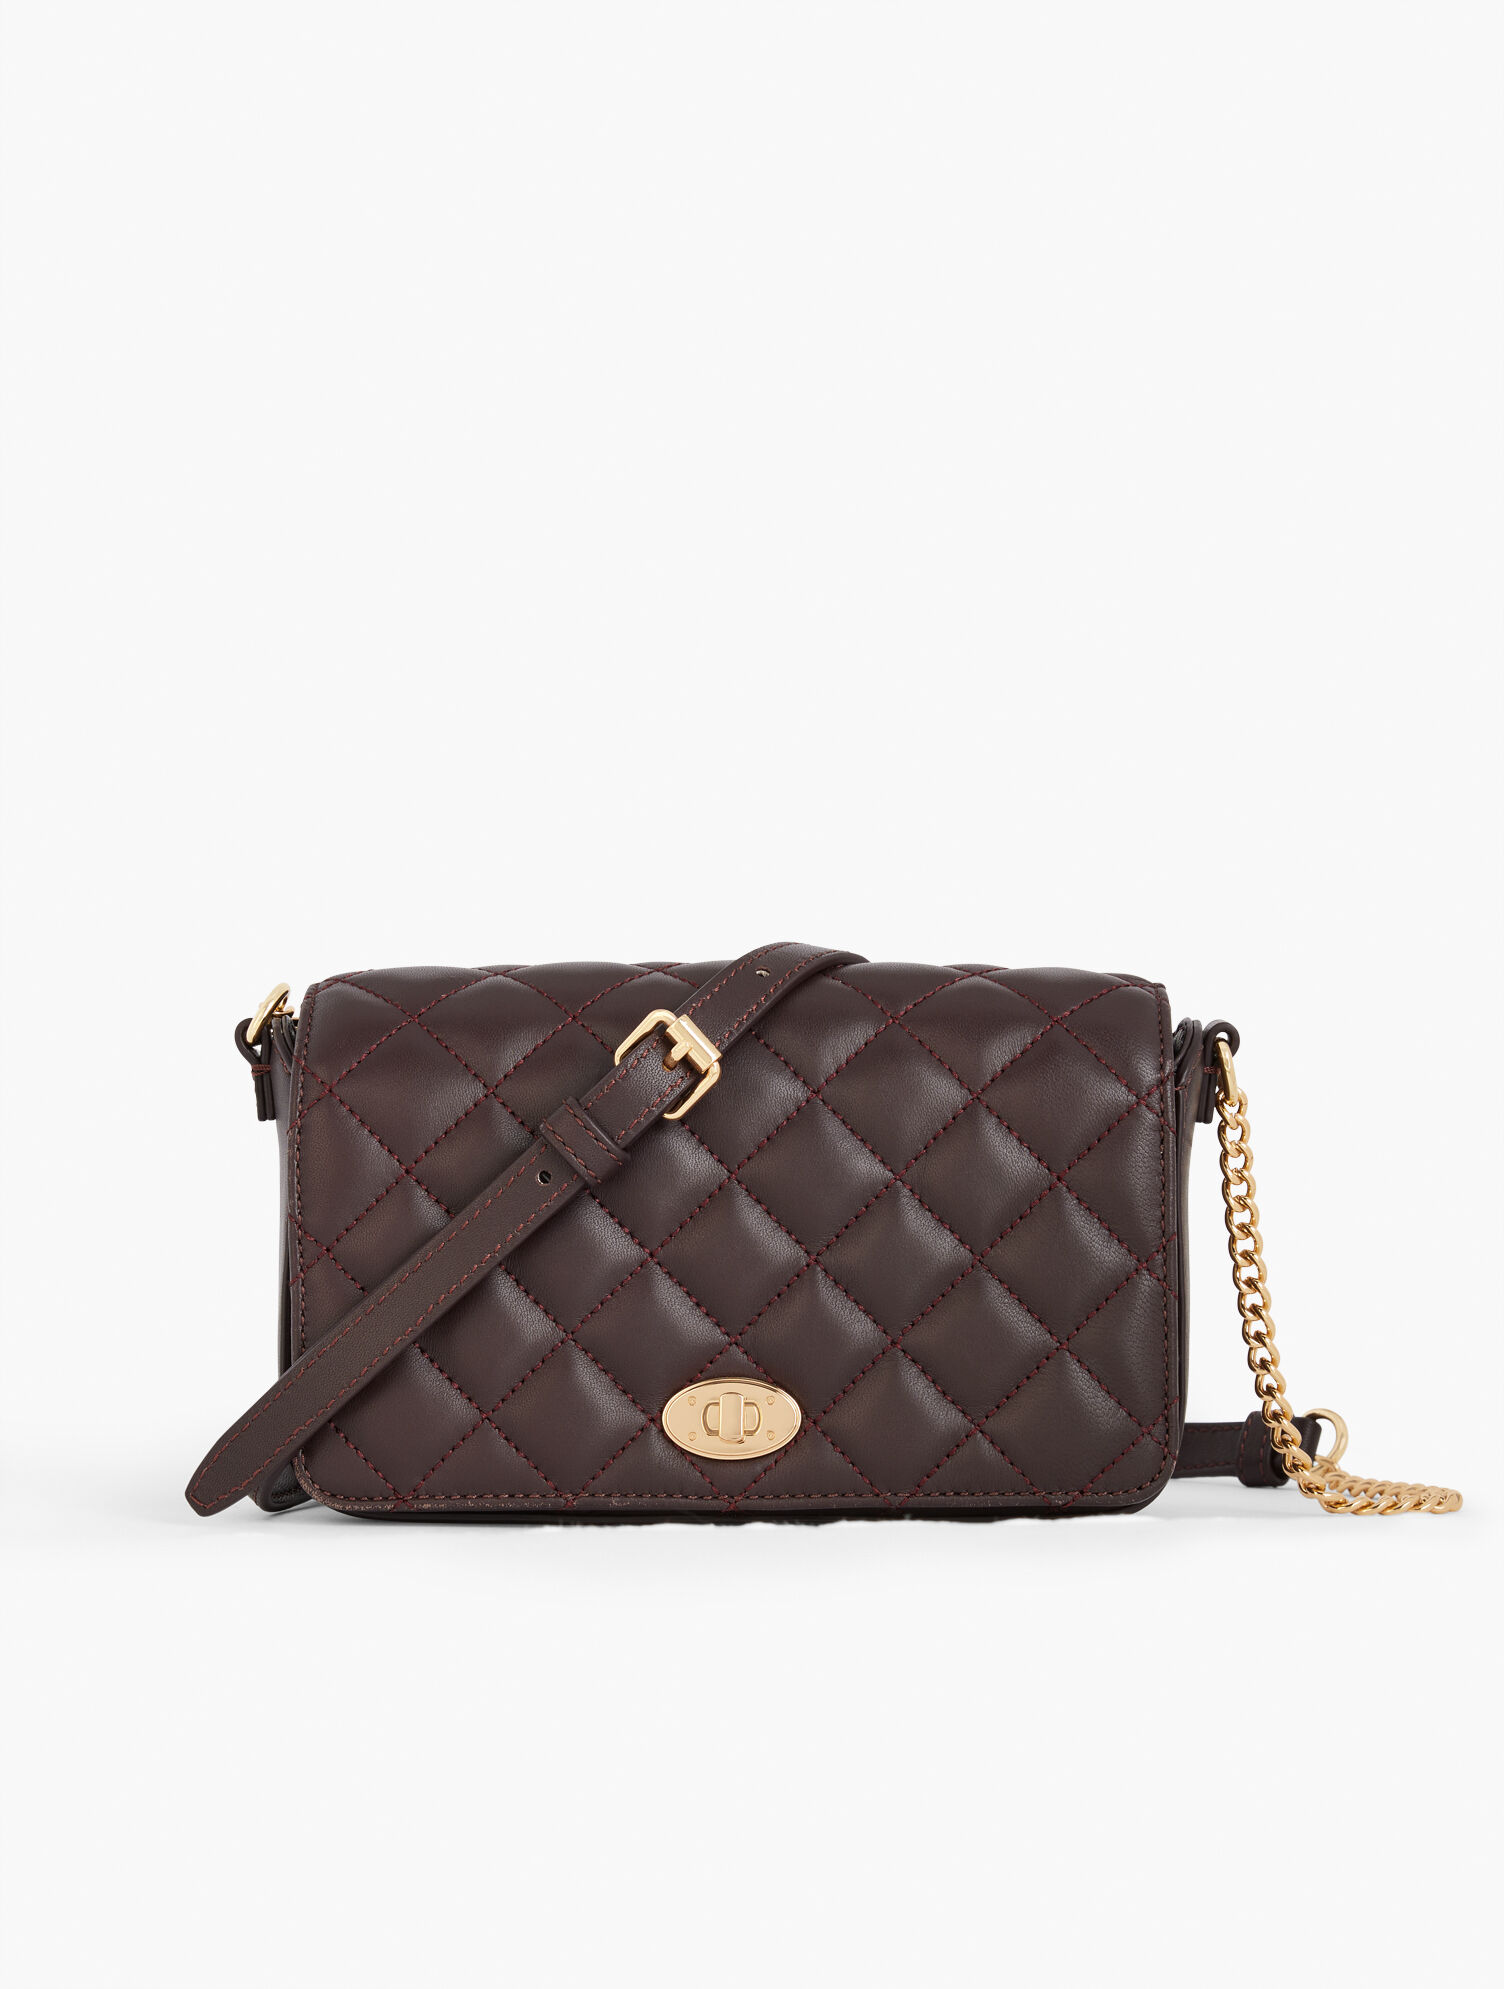 CHANEL BLACK LEATHER QUILTED SMALL CHAIN STRAP CROSS BODY BAG